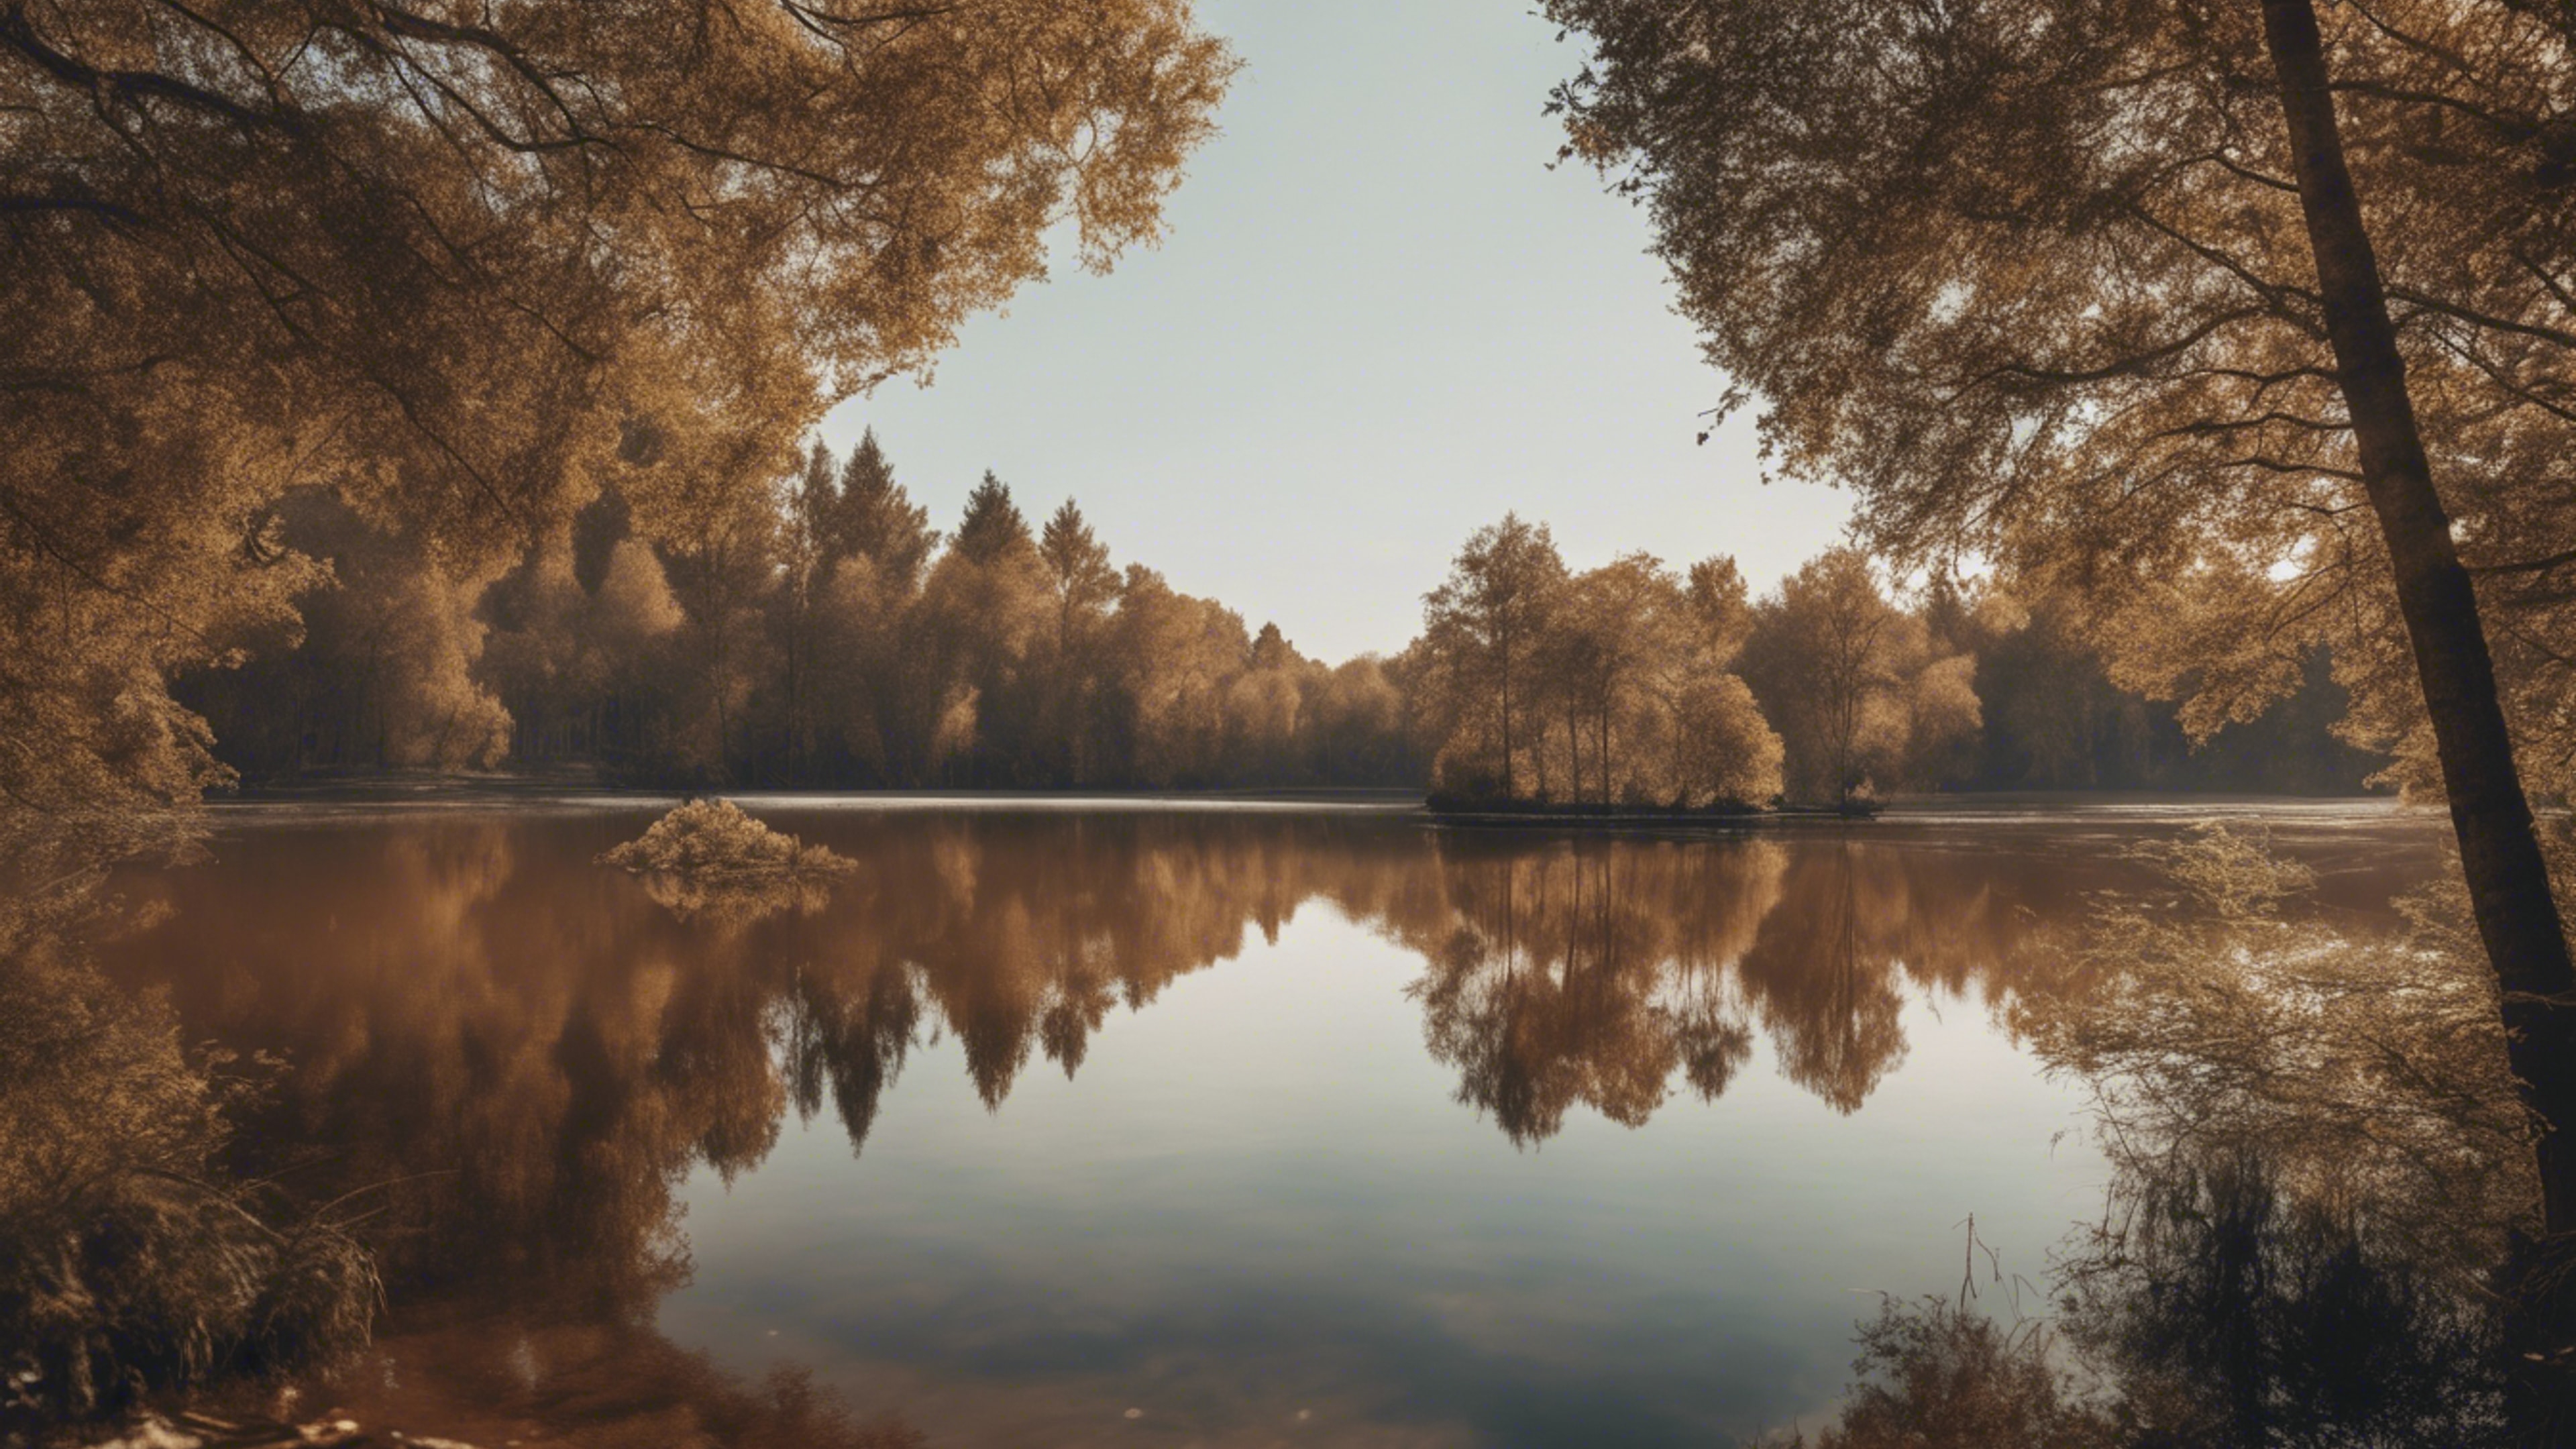 A tranquil heart-shaped brown lake surrounded by towering trees.壁紙[5cf43da7a339496eadfc]